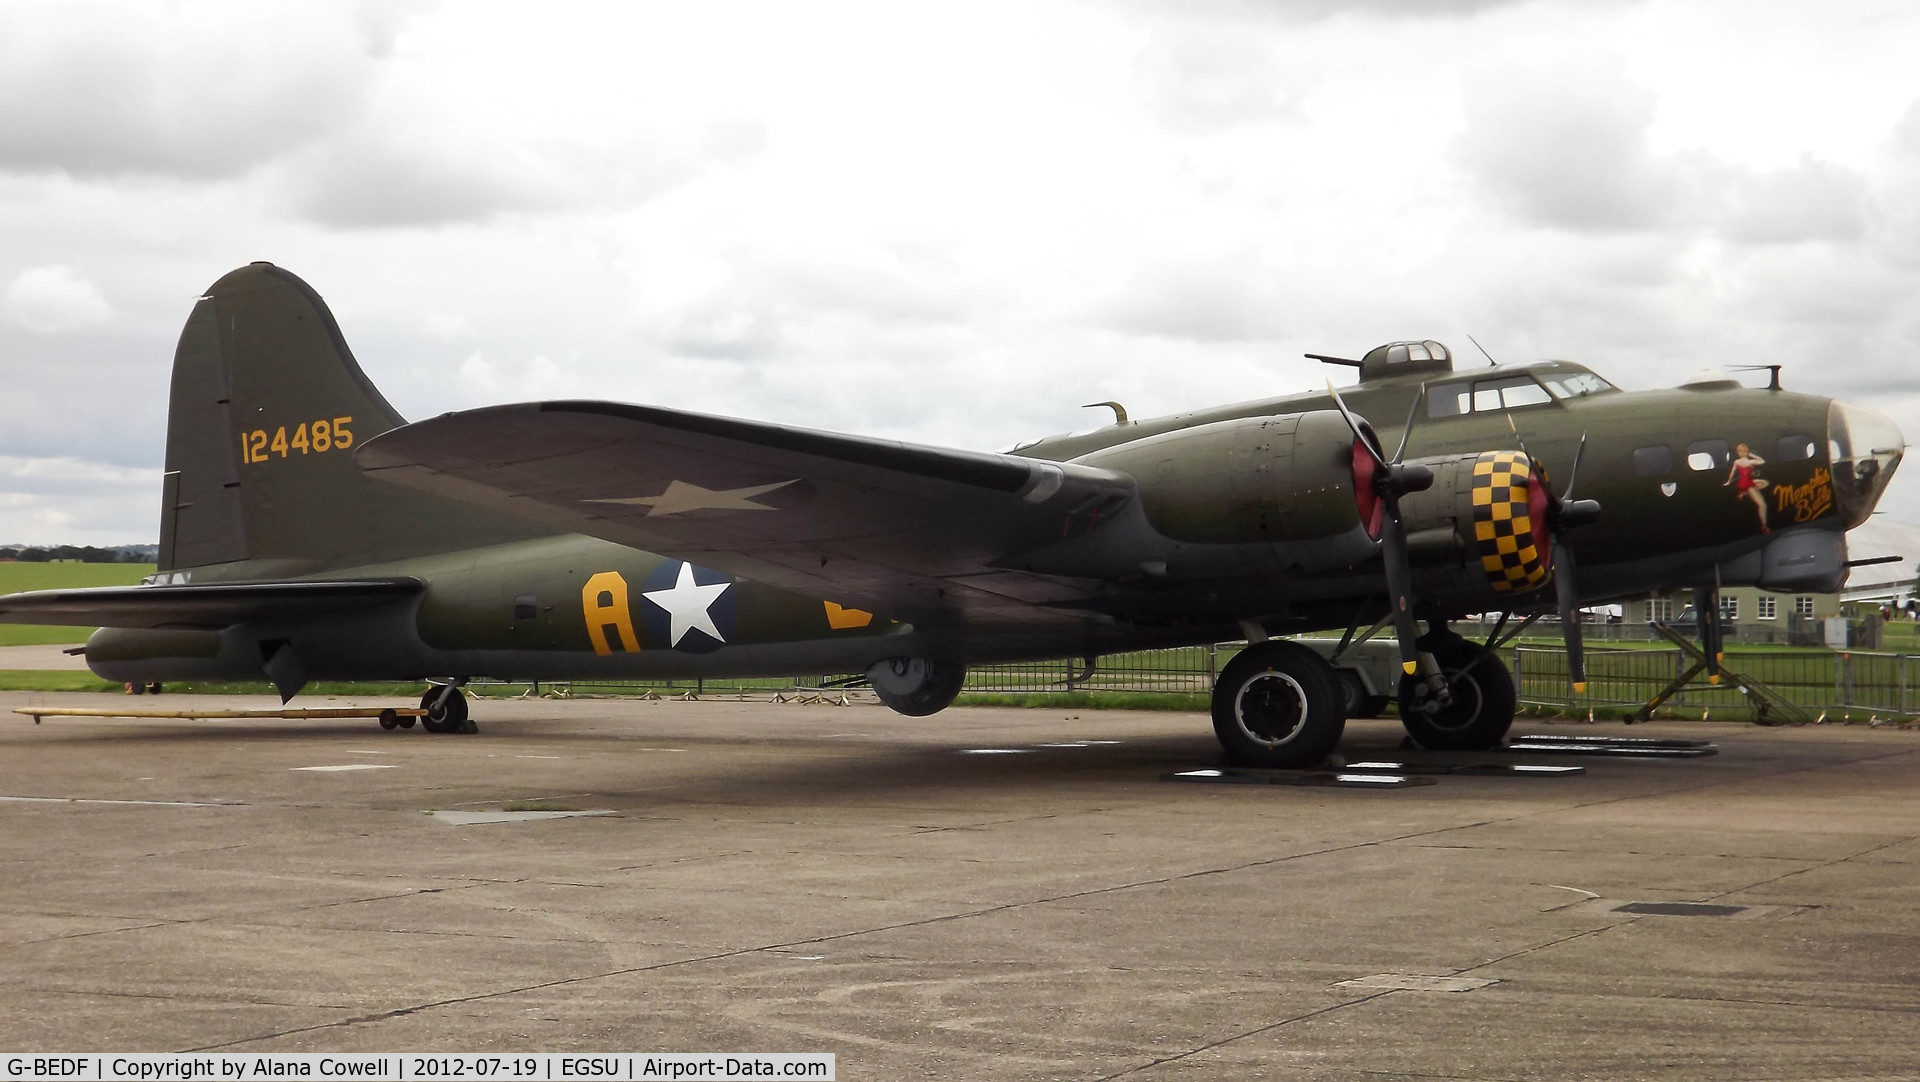 G-BEDF, 1944 Boeing B-17G Flying Fortress C/N 8693, G-BEDF at Duxford Airfield